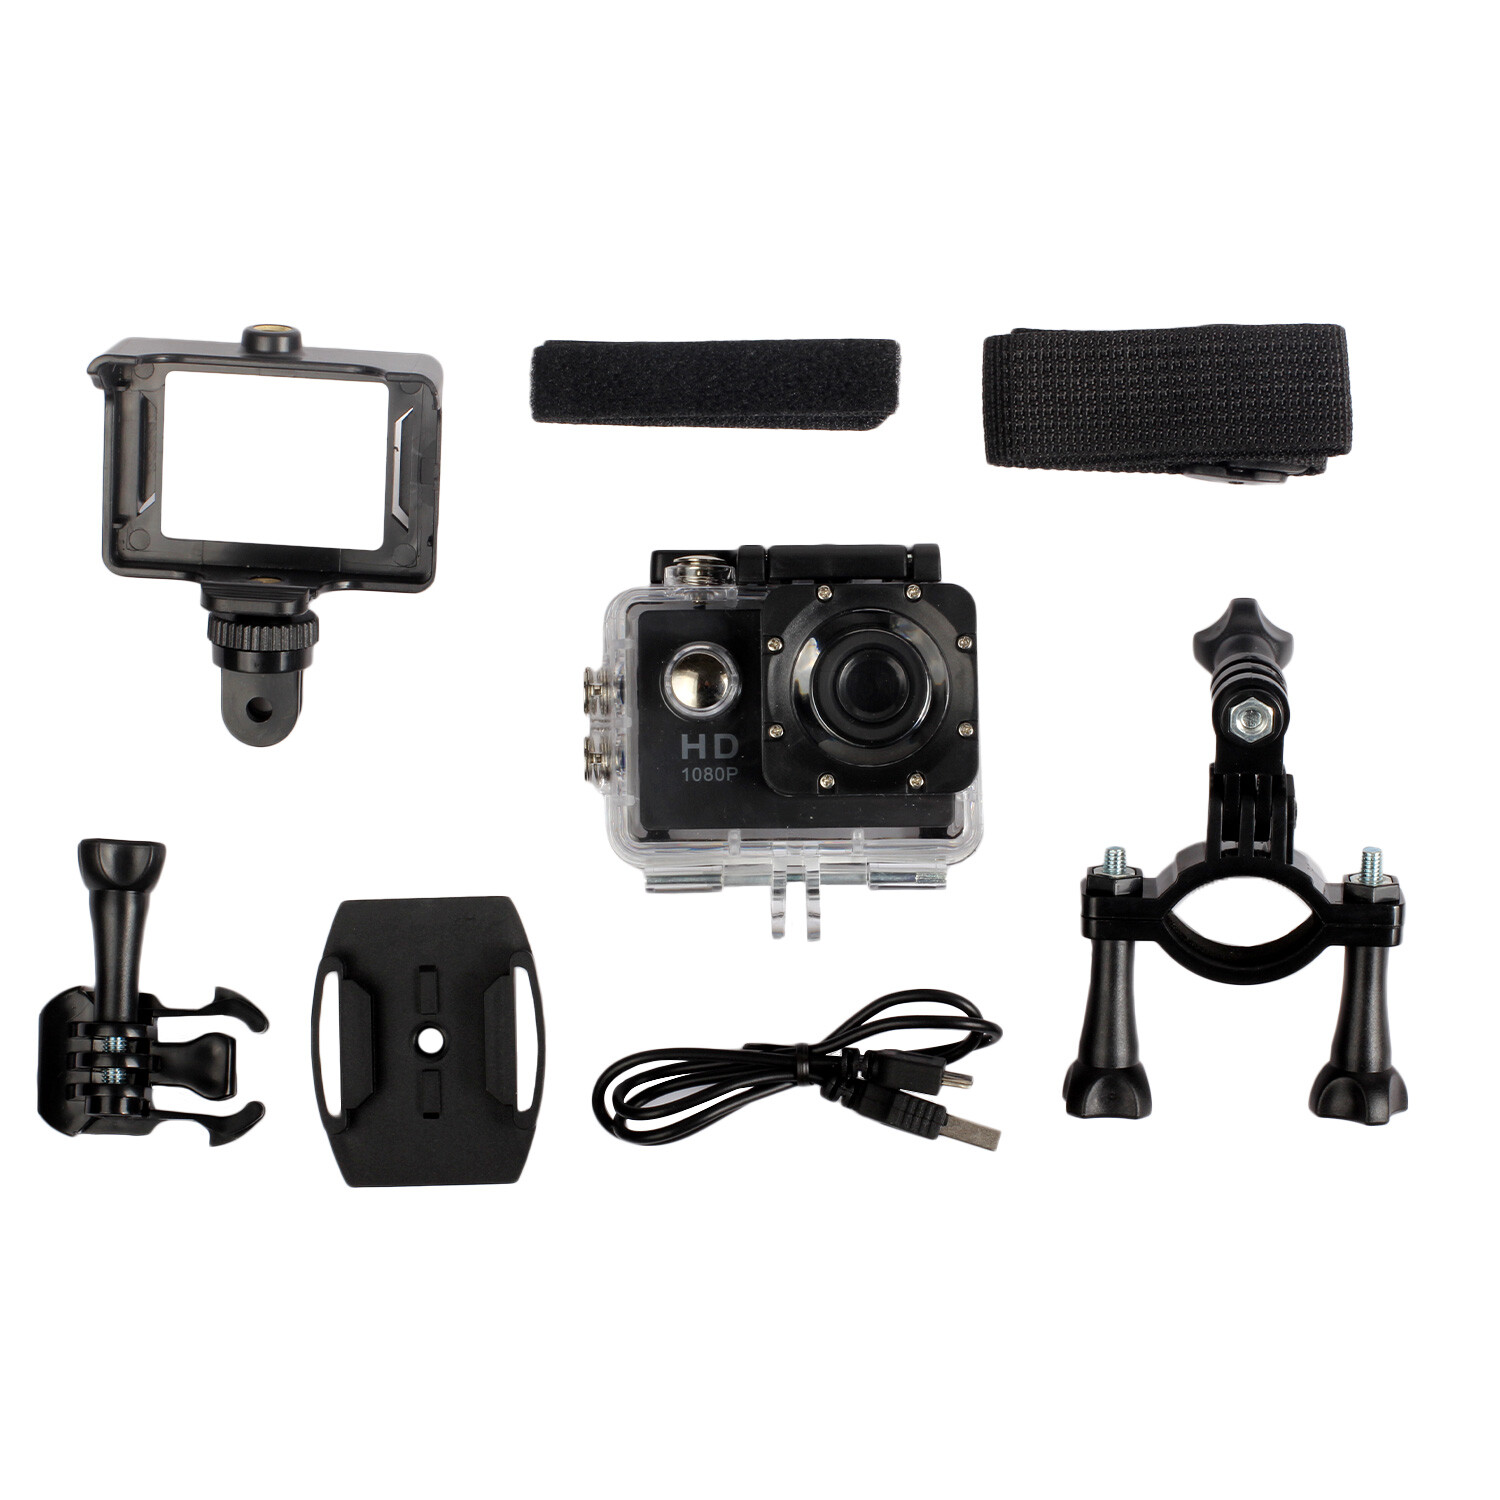 Action Camera with SD Card - Black Image 3